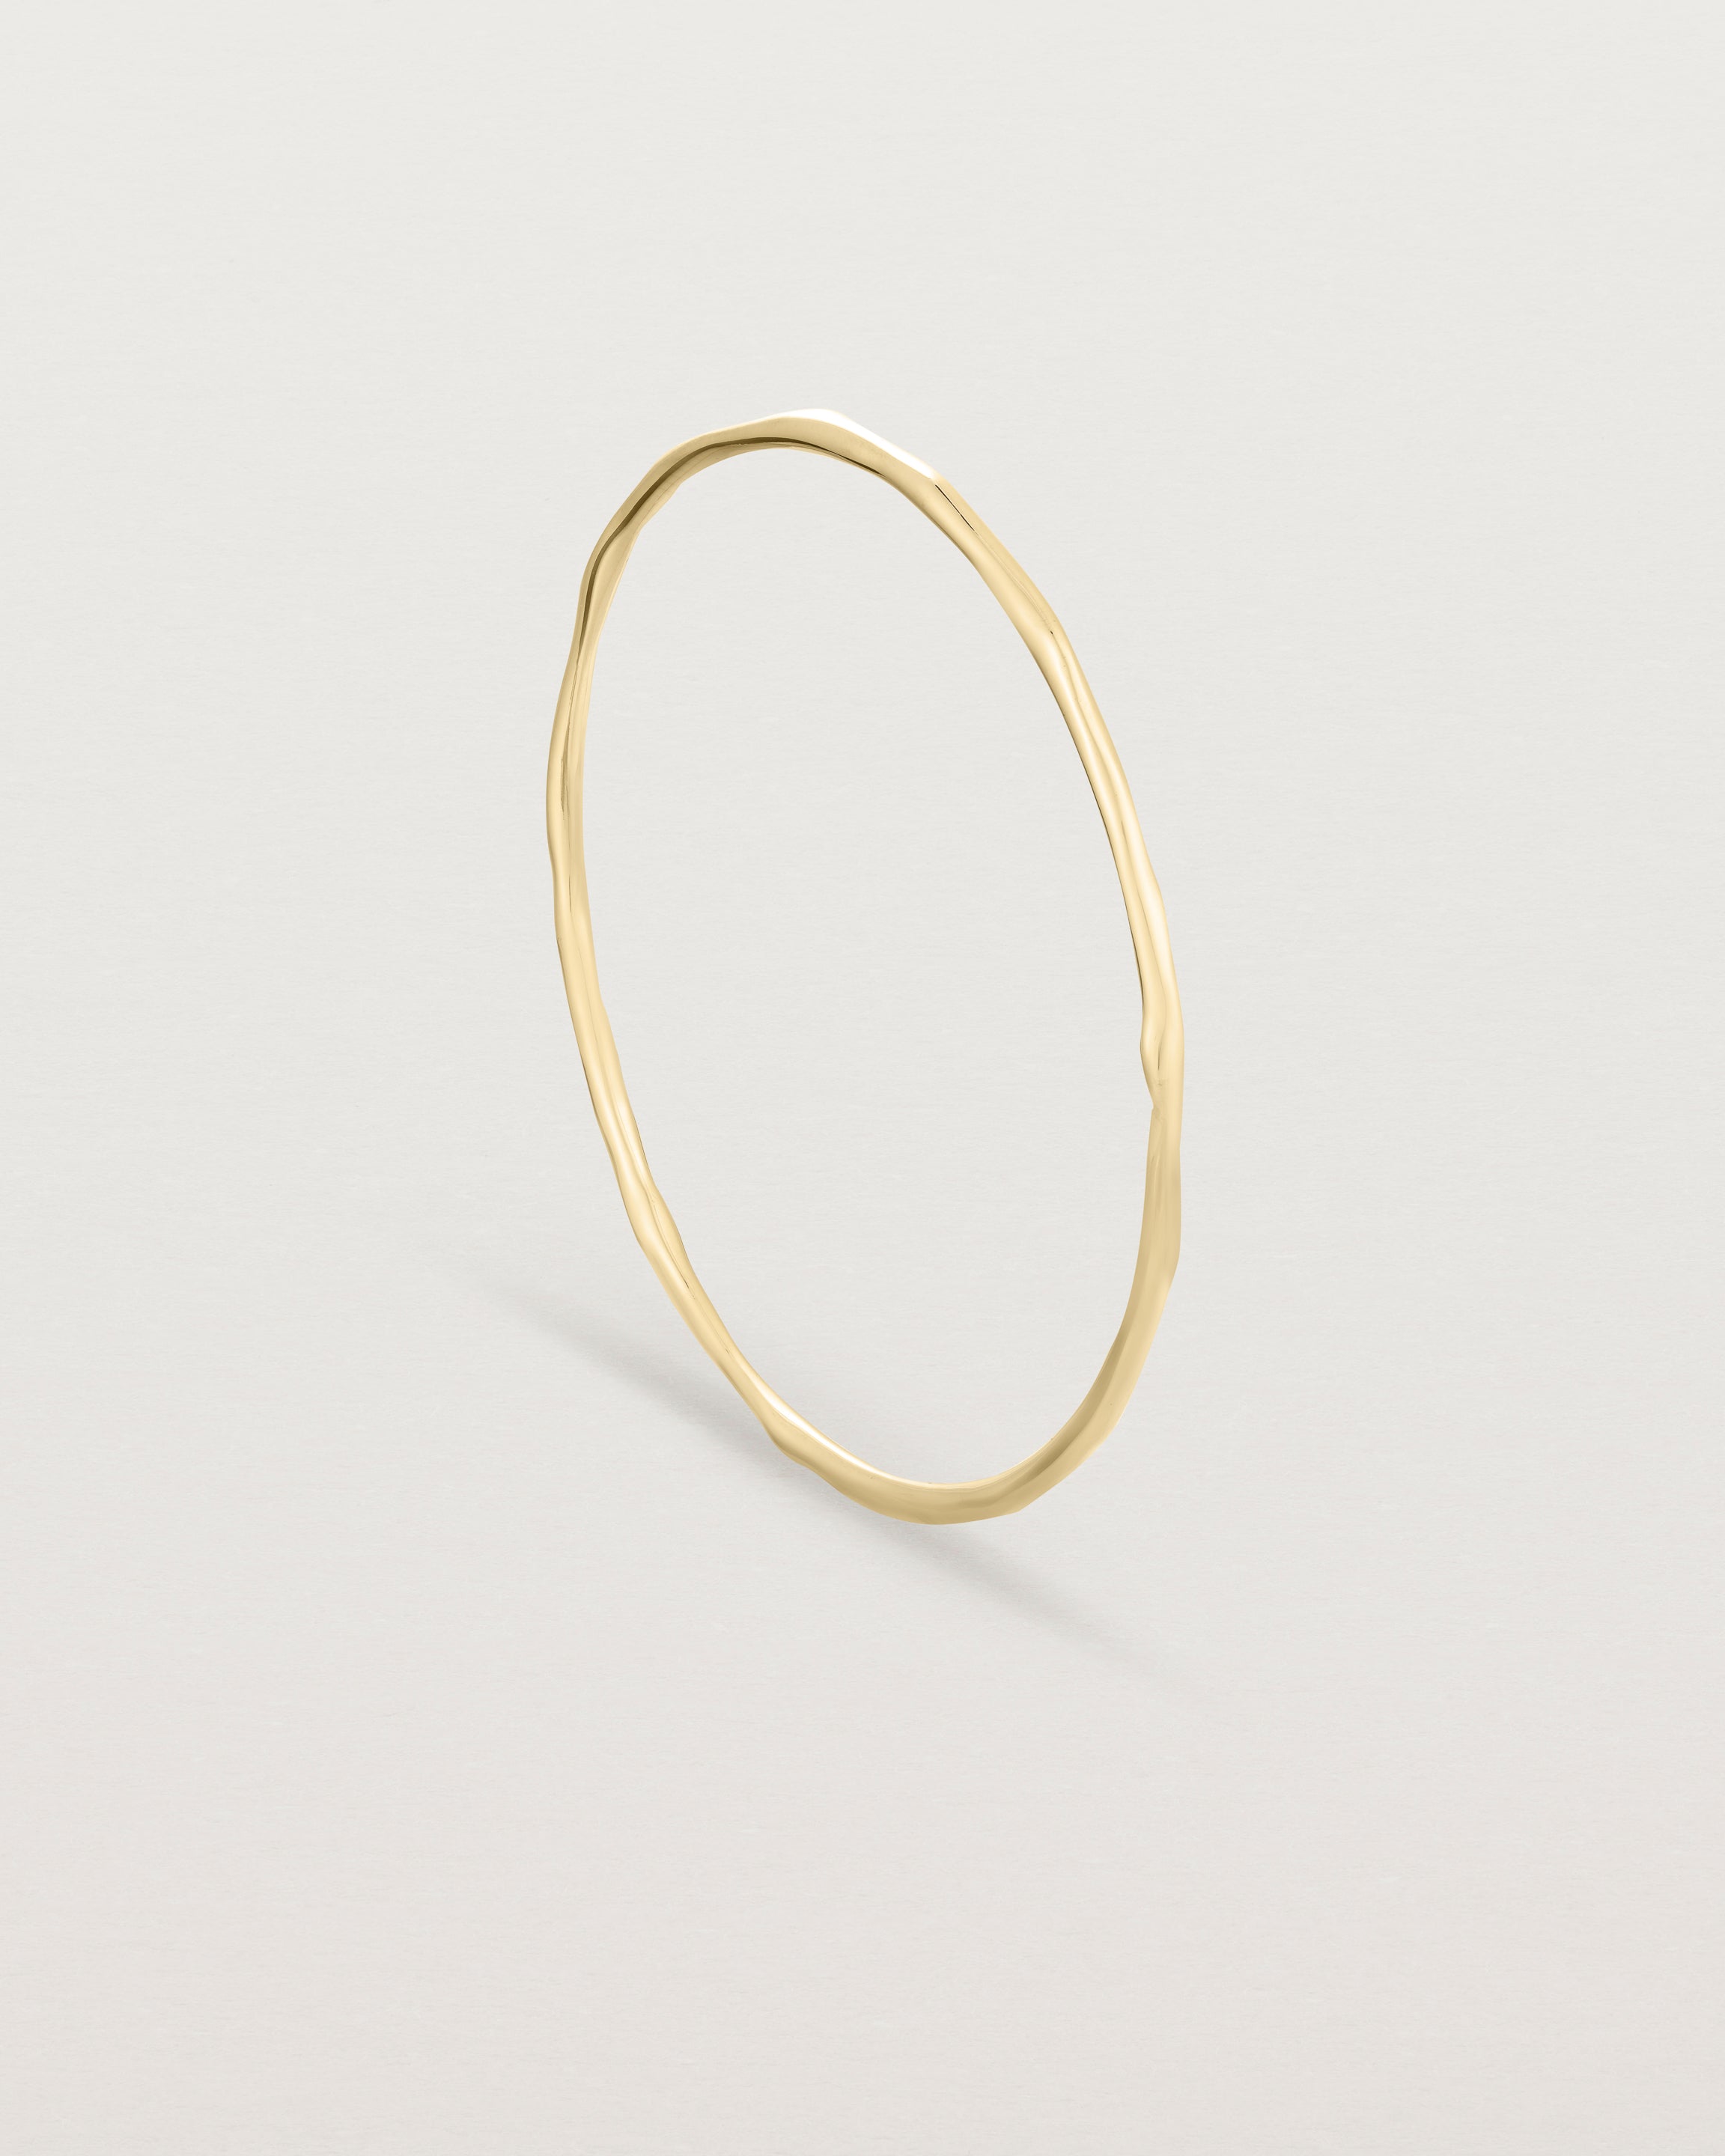 Standing view of the Organic Bangle | Yellow Gold.